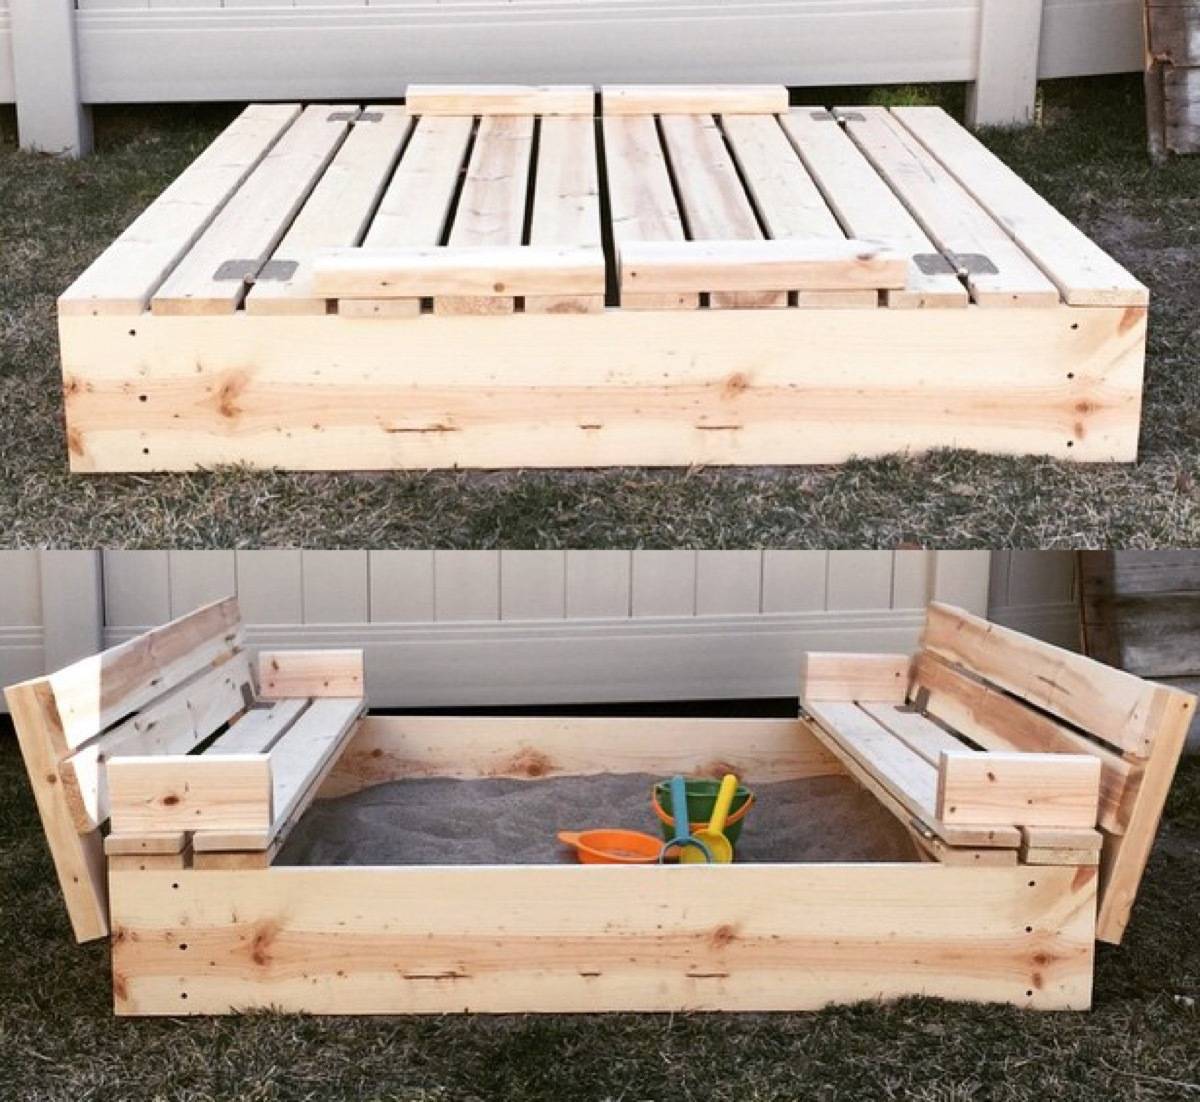 62 DIY Projects to Transform Your Backyard: Sandbox with lid